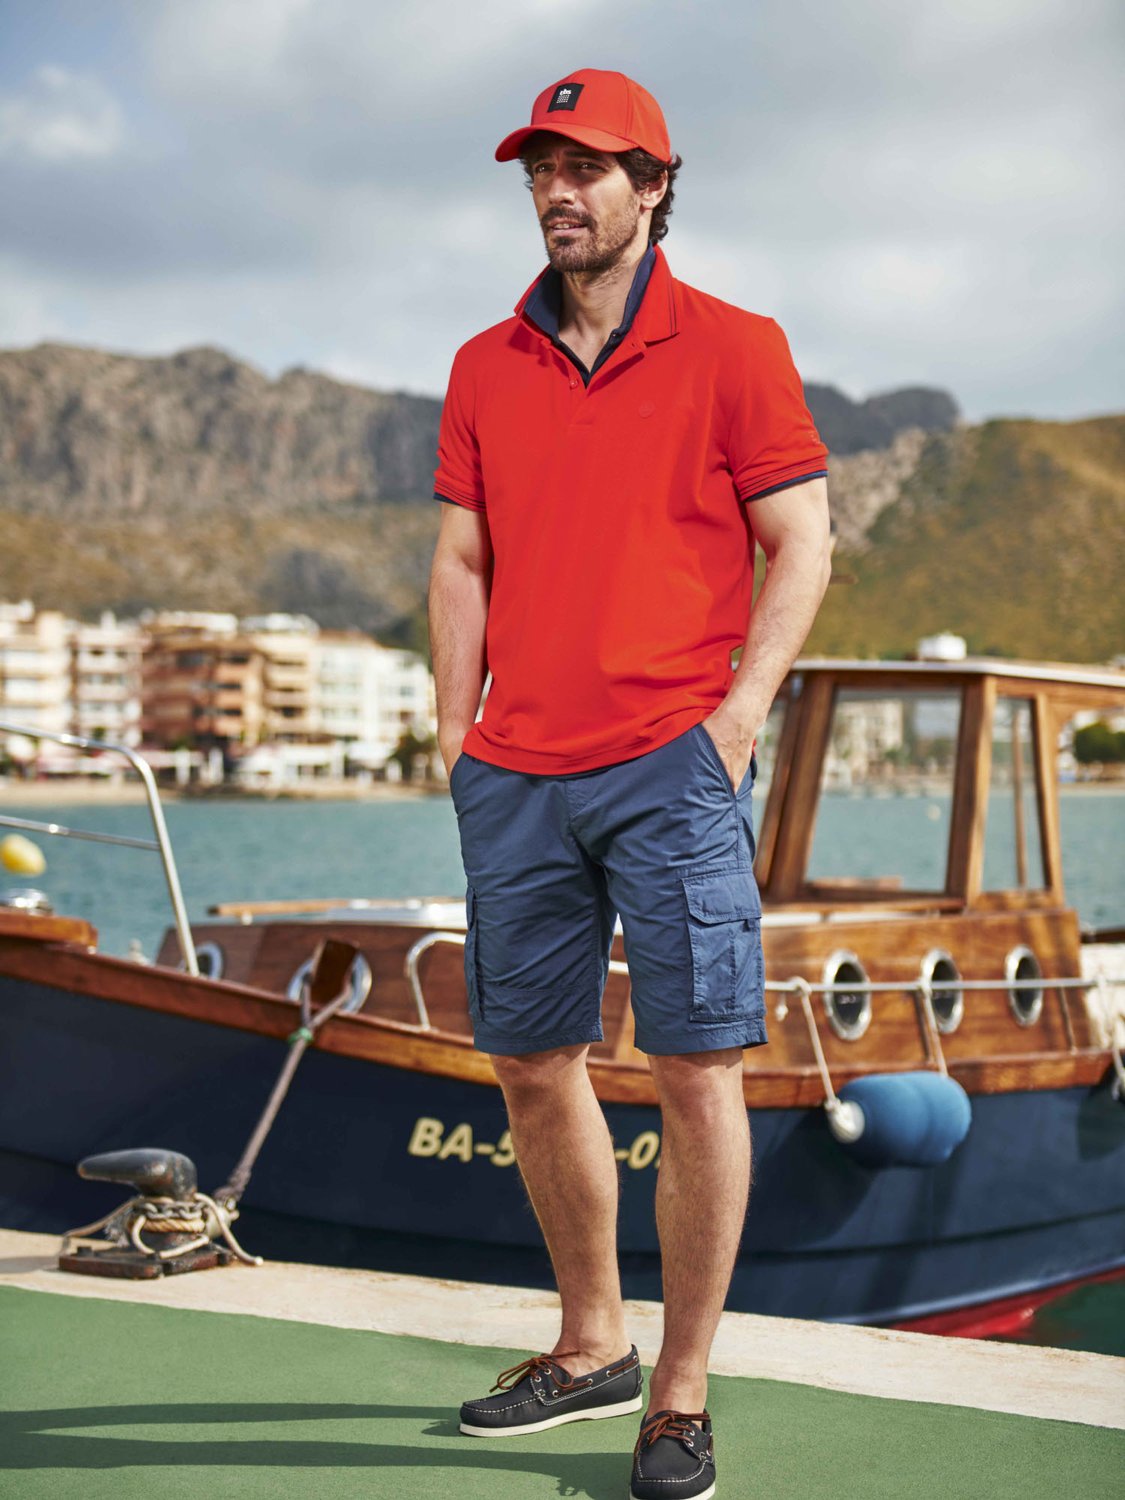 Polo Homme Séchage Rapide Stretch Rouge